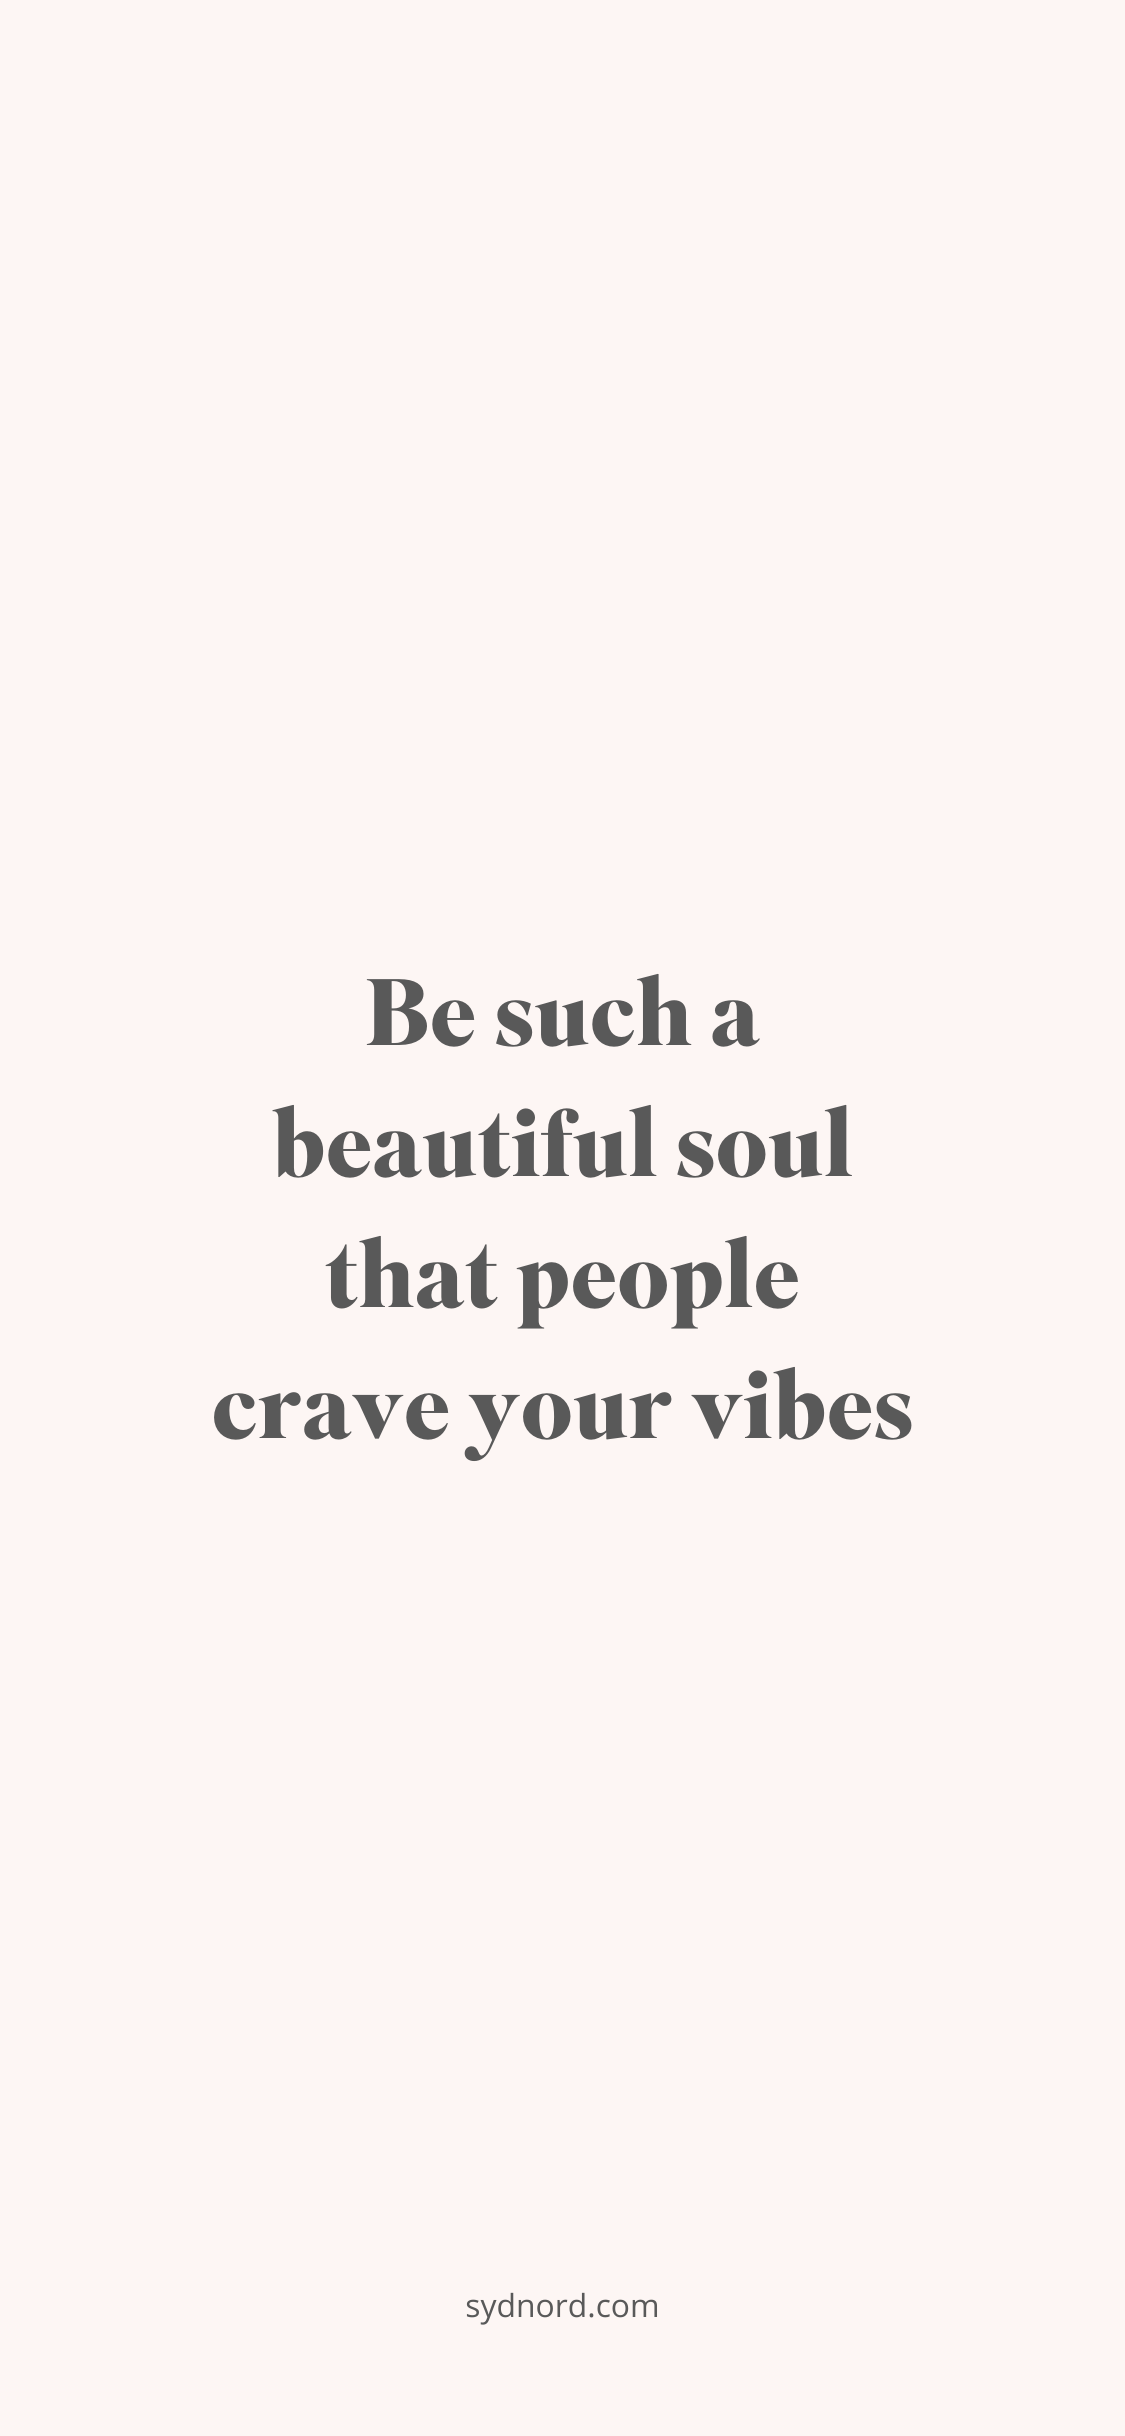 Positive messages about life: Be such a beautiful soul that people crave your vibes